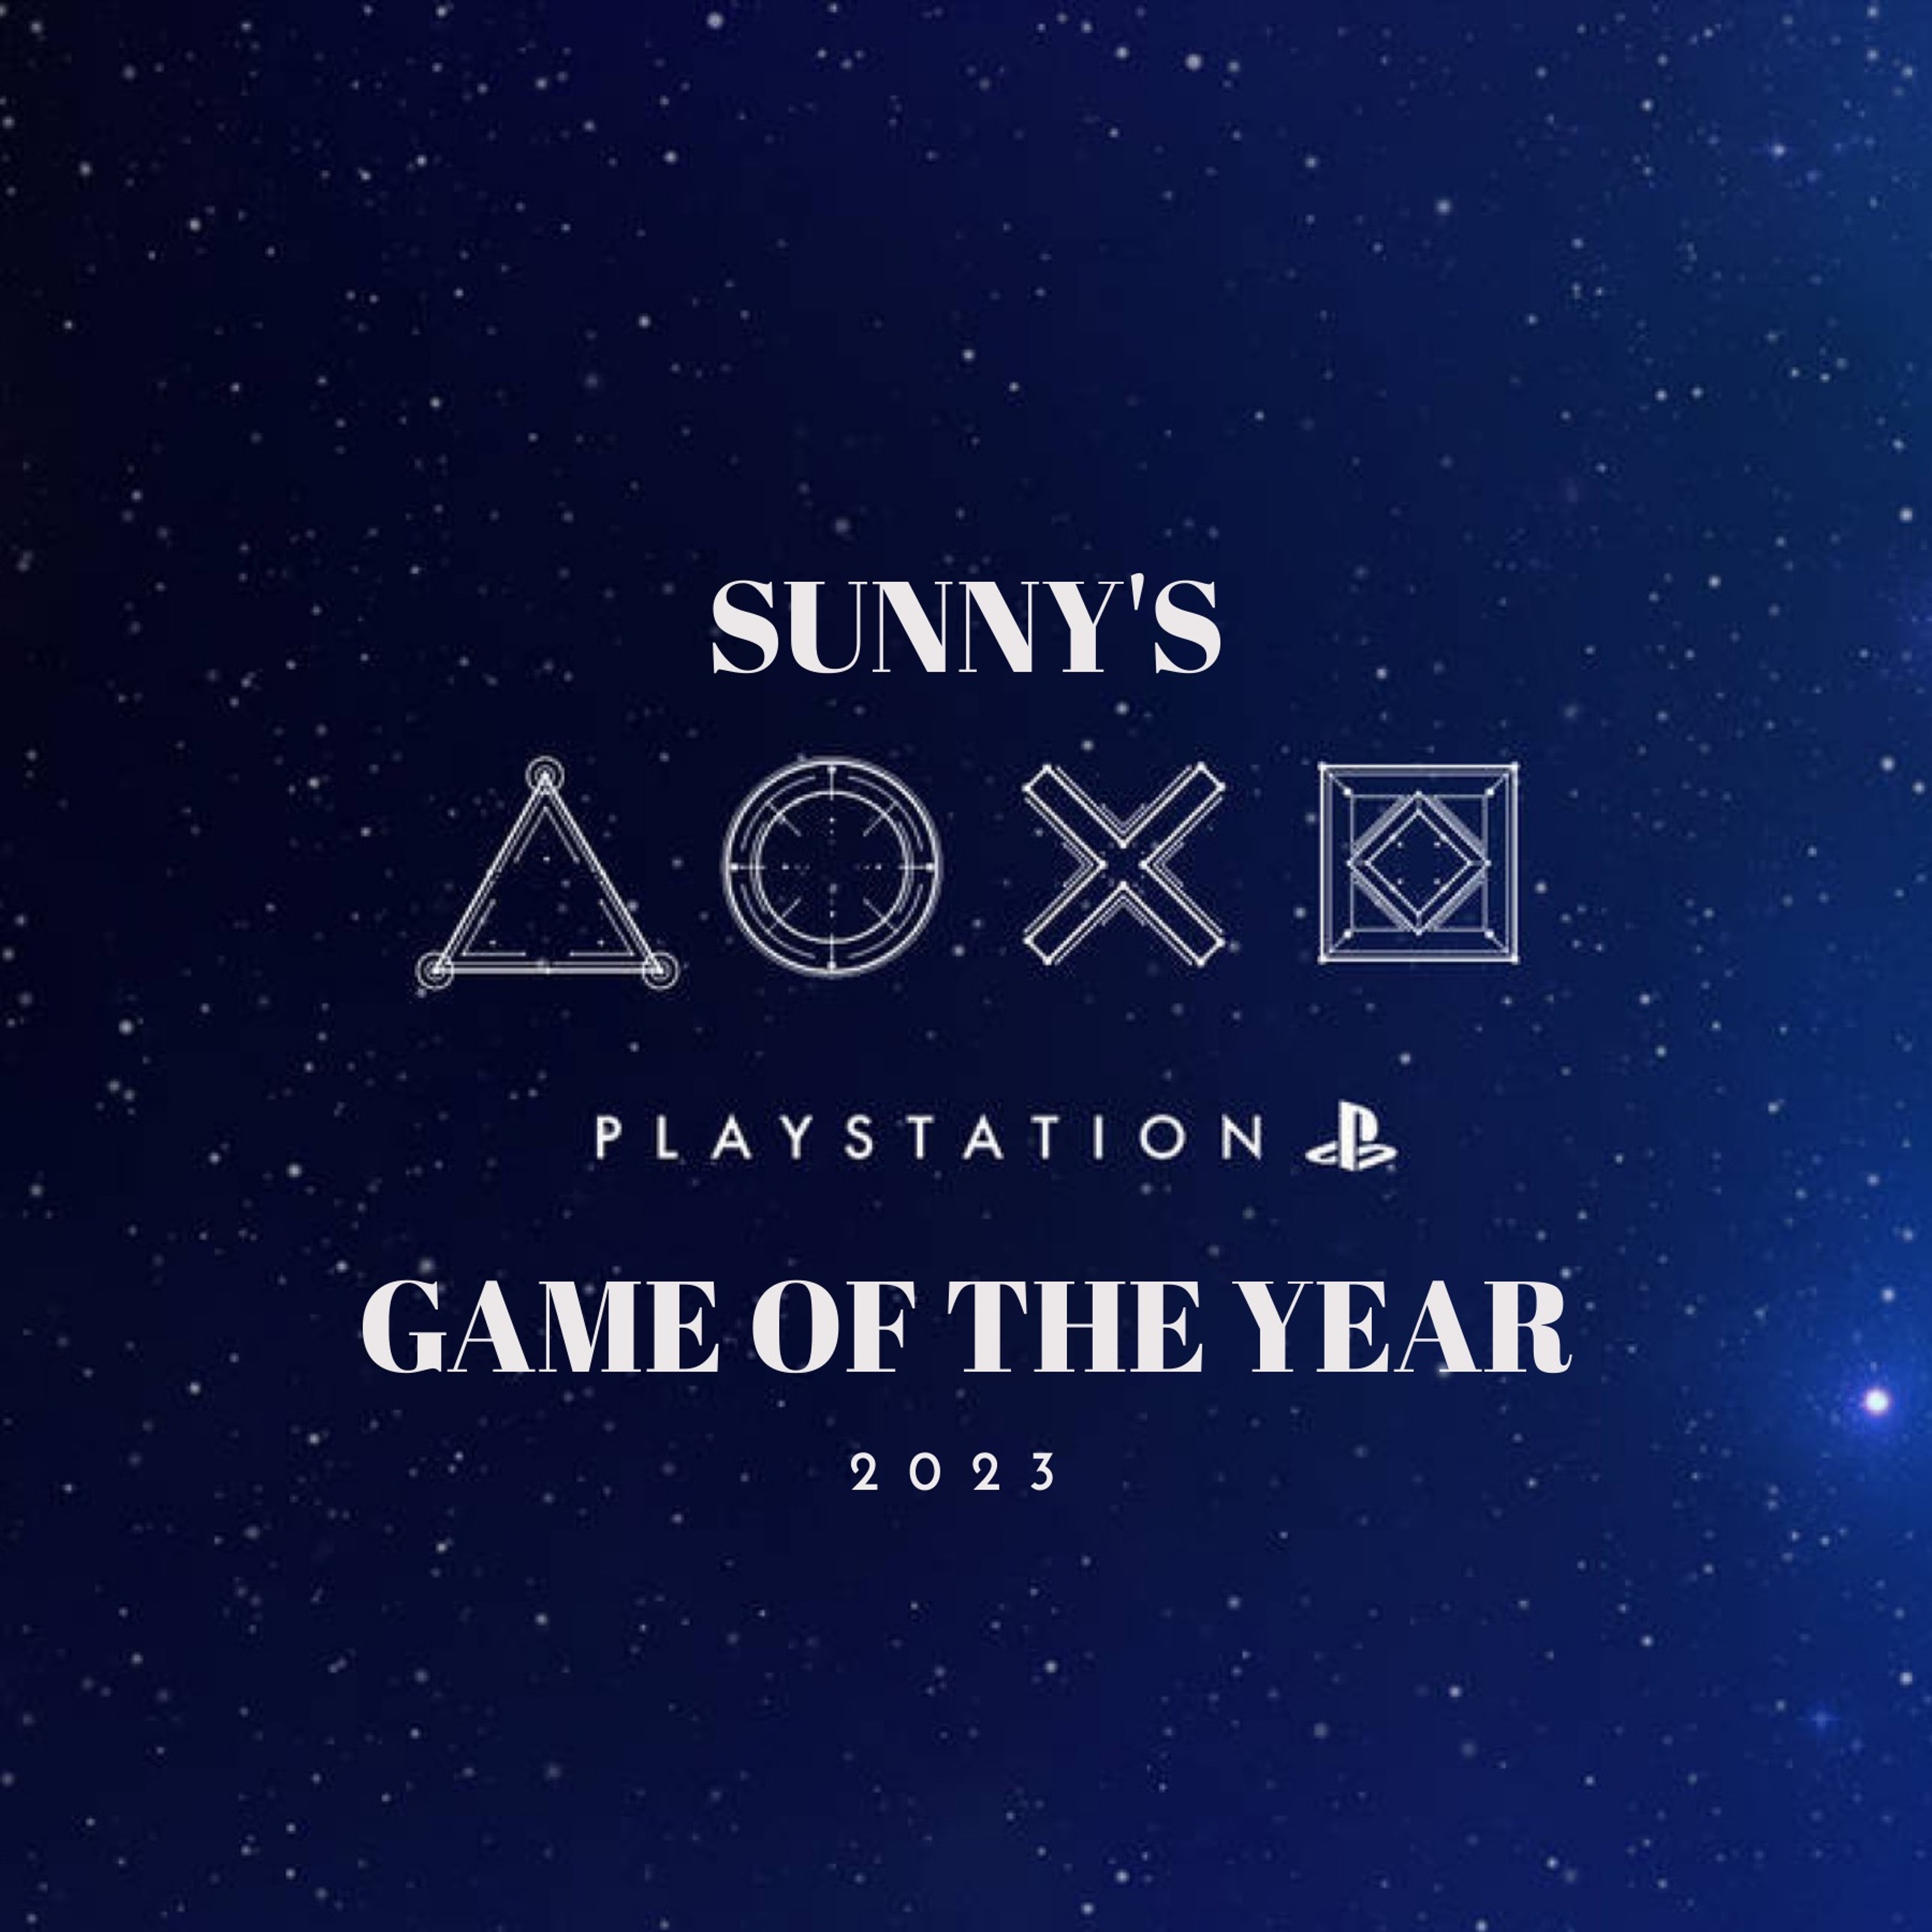 Sunny’s Game of The Year 2023